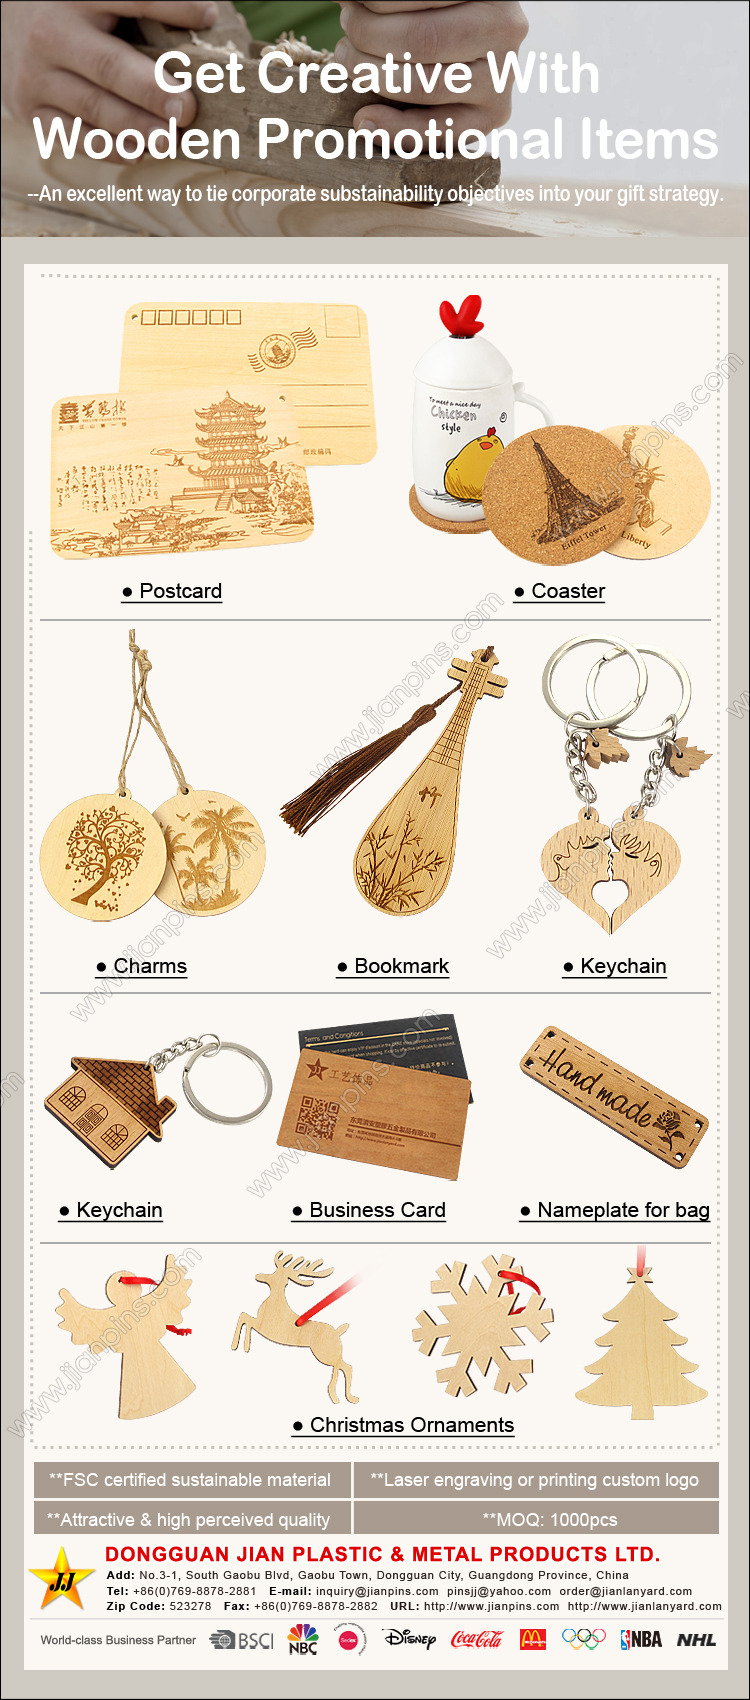 Wooden Promotional Items